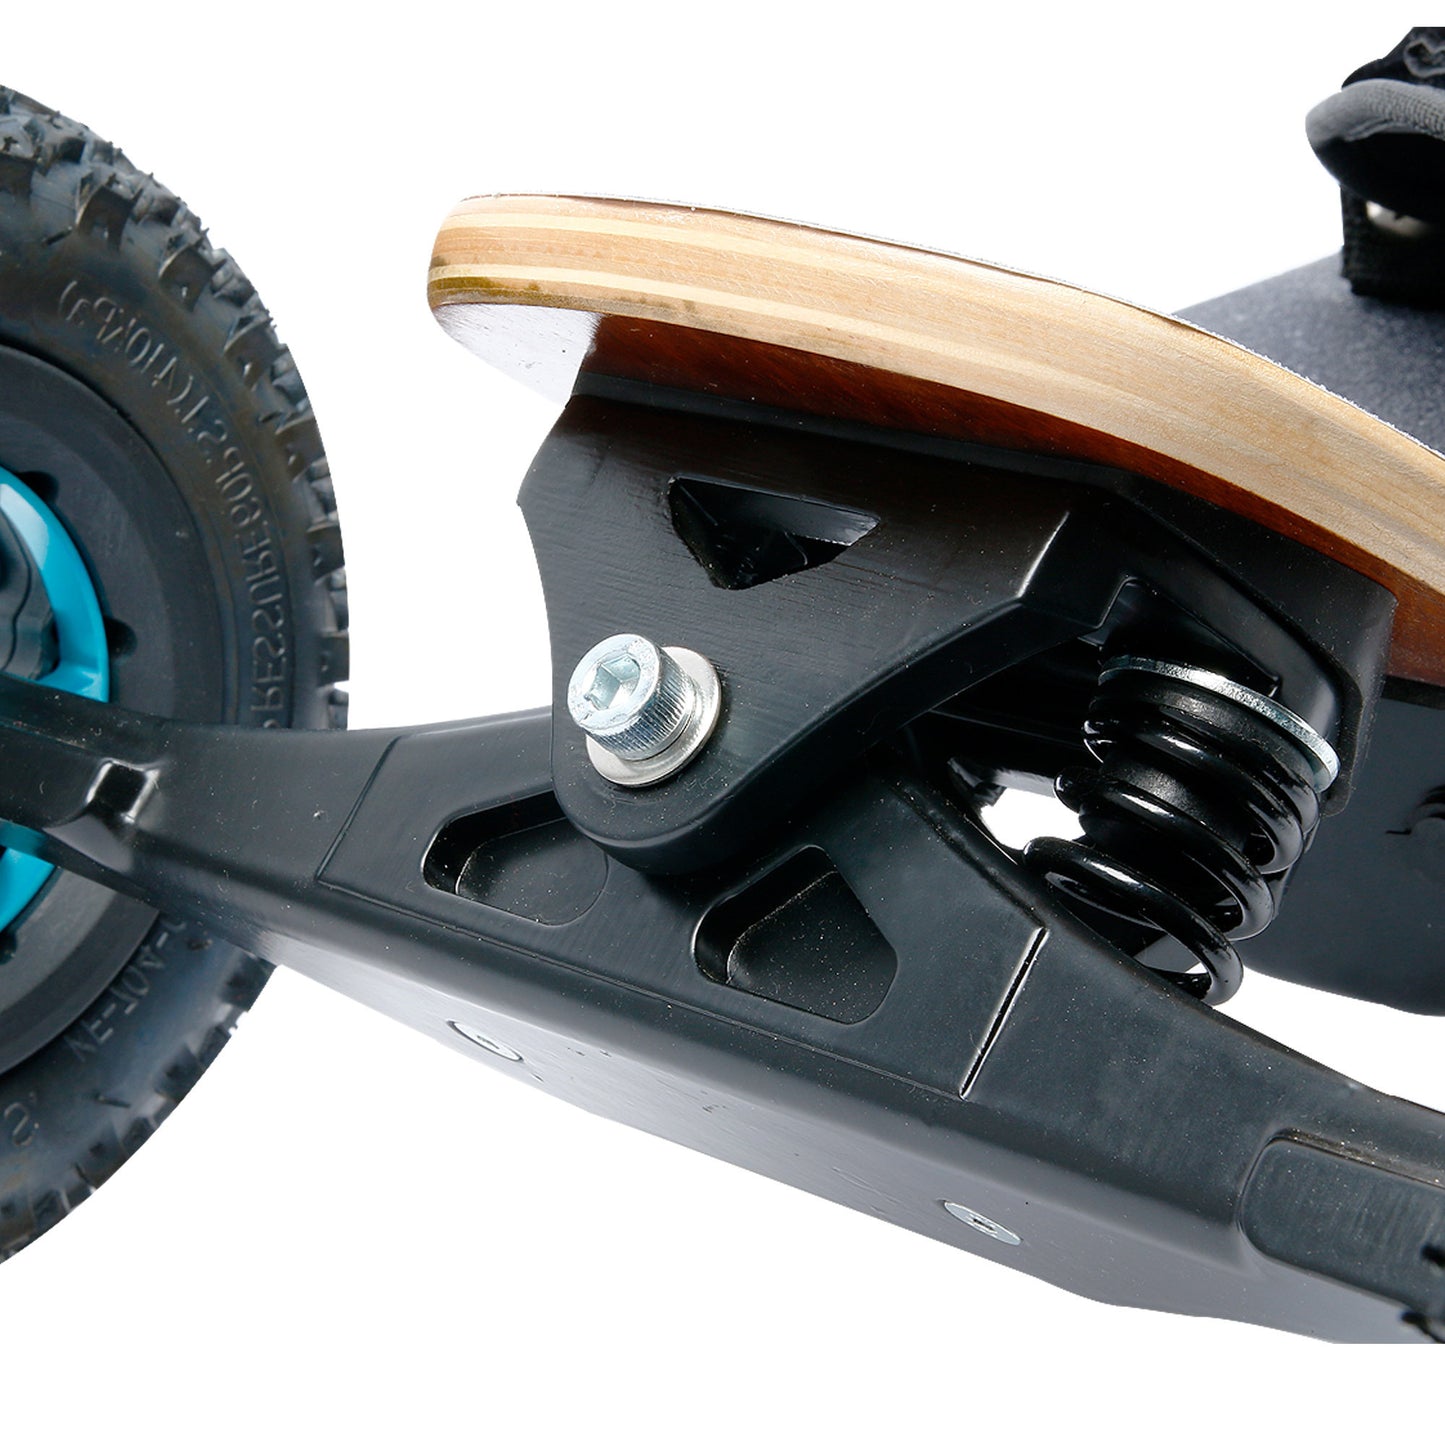 Electric Skateboards for Adults 3500W Electric Longboard Offroad Dual Belt Motors Mountain Board with Remote Up to 32MPH with 8 Inch Fat Tires and Max Load 330Lbs